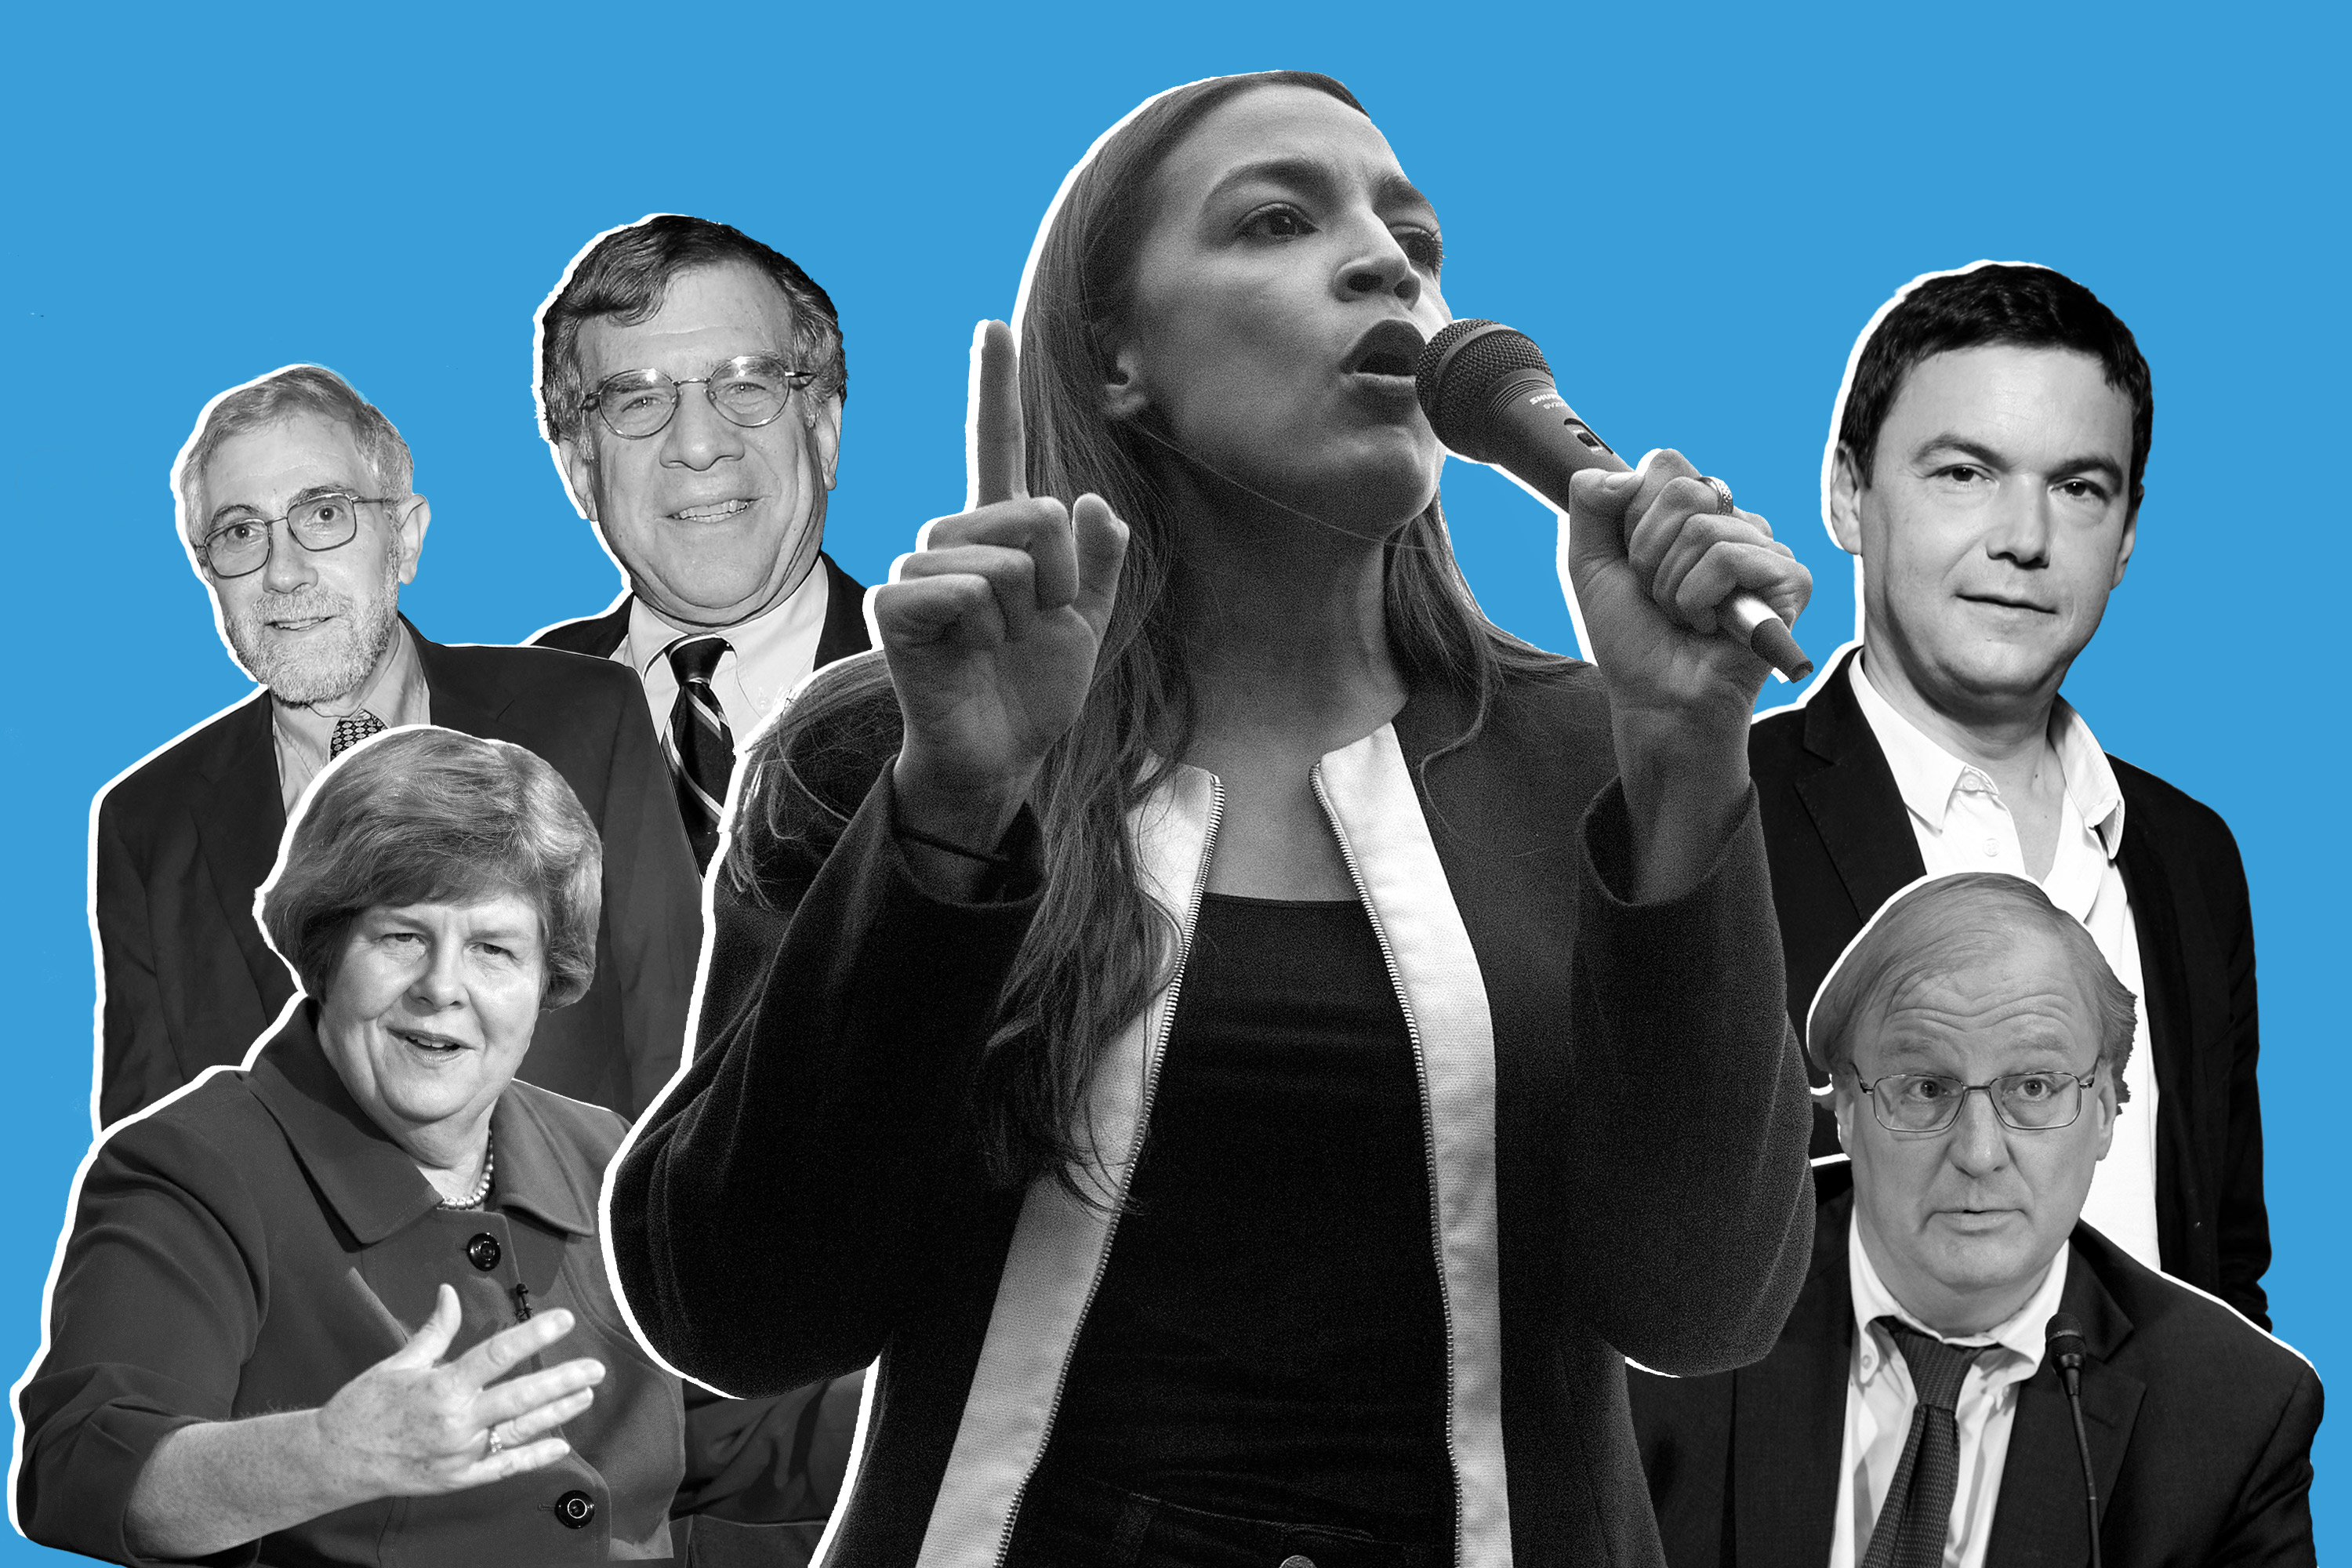 Alexandria Ocasio-Cortez Suggested a 70% Tax Rate on the Rich. These 5 Famous Economists Say It Could Work